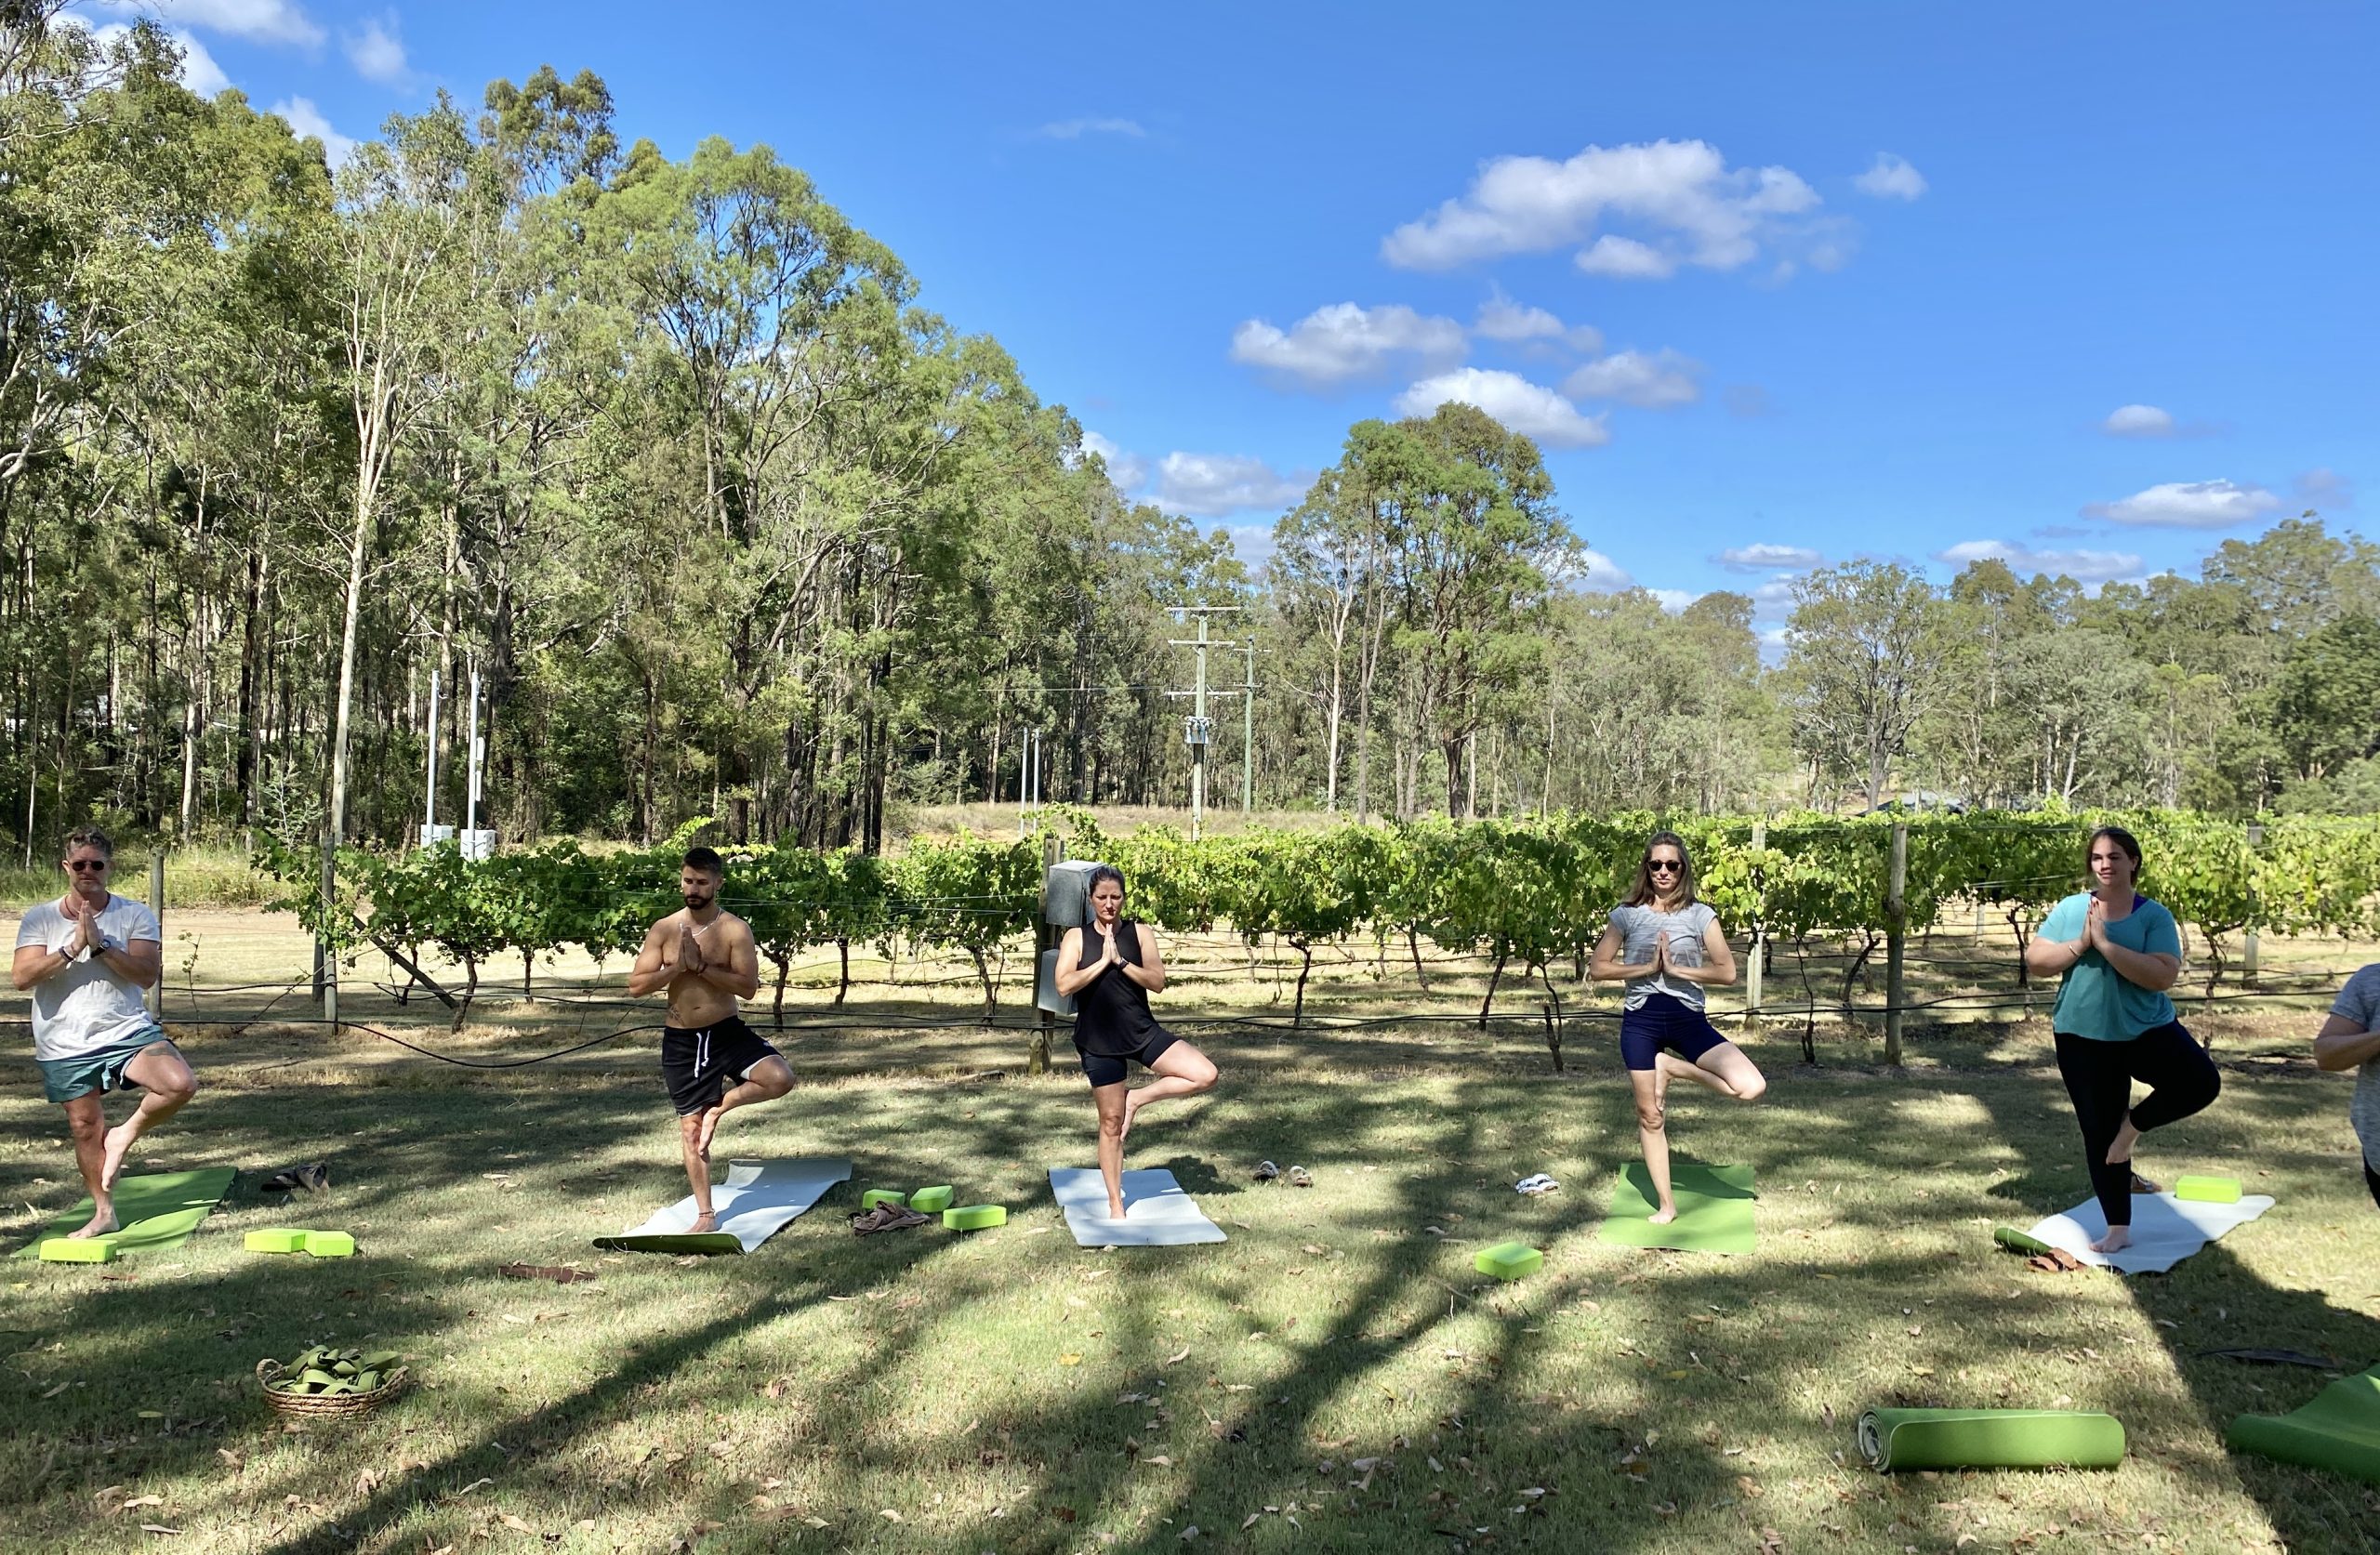 We come to your conference venue in the vineyards to teach yoga and meditation. We even bring yoga mats